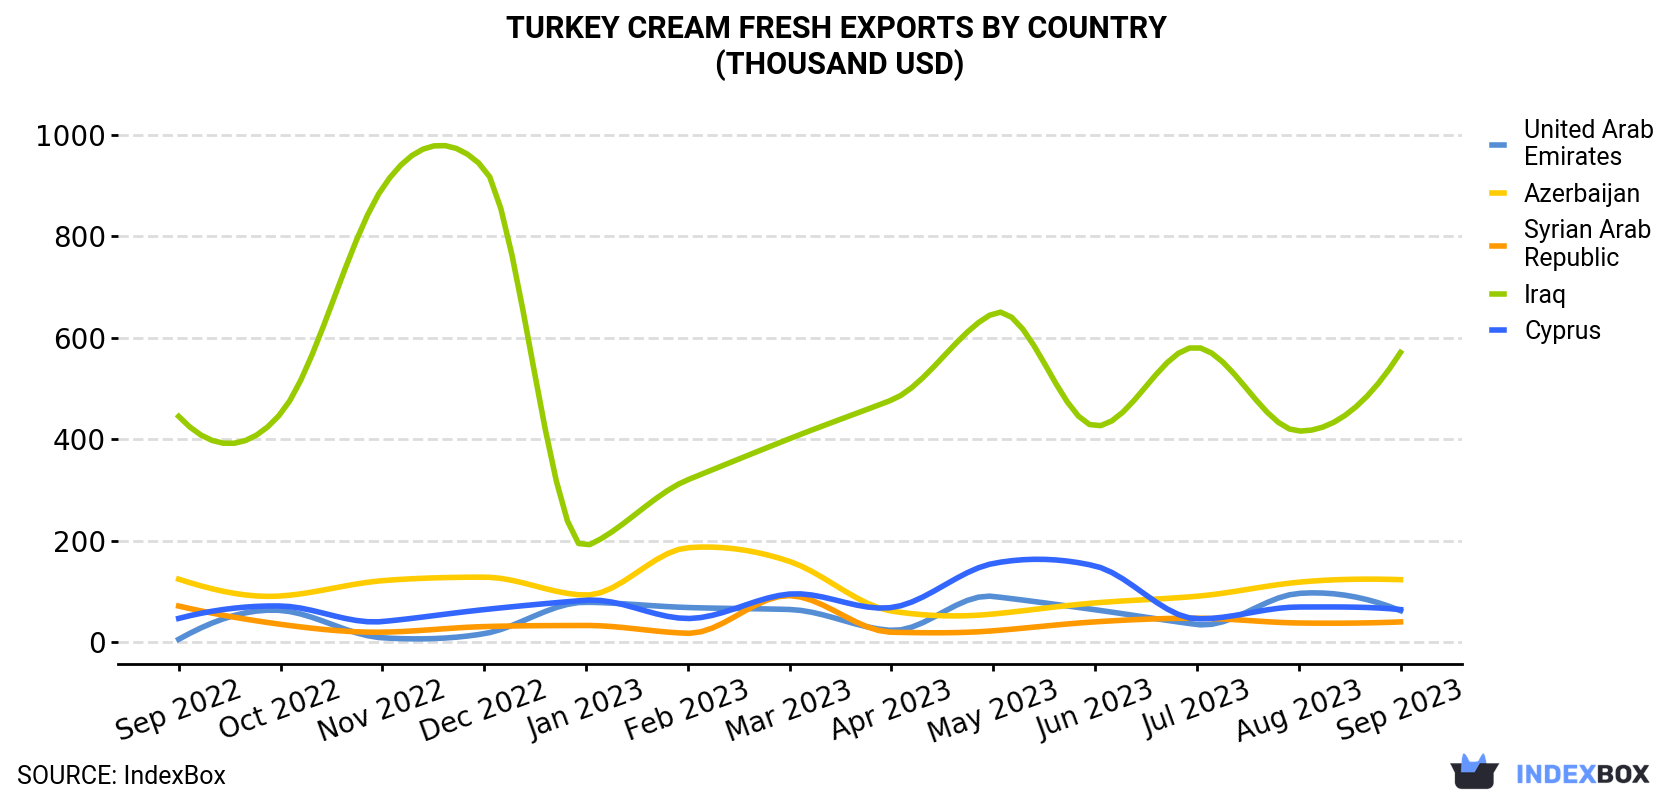 Turkey Cream Fresh Exports By Country (Thousand USD)